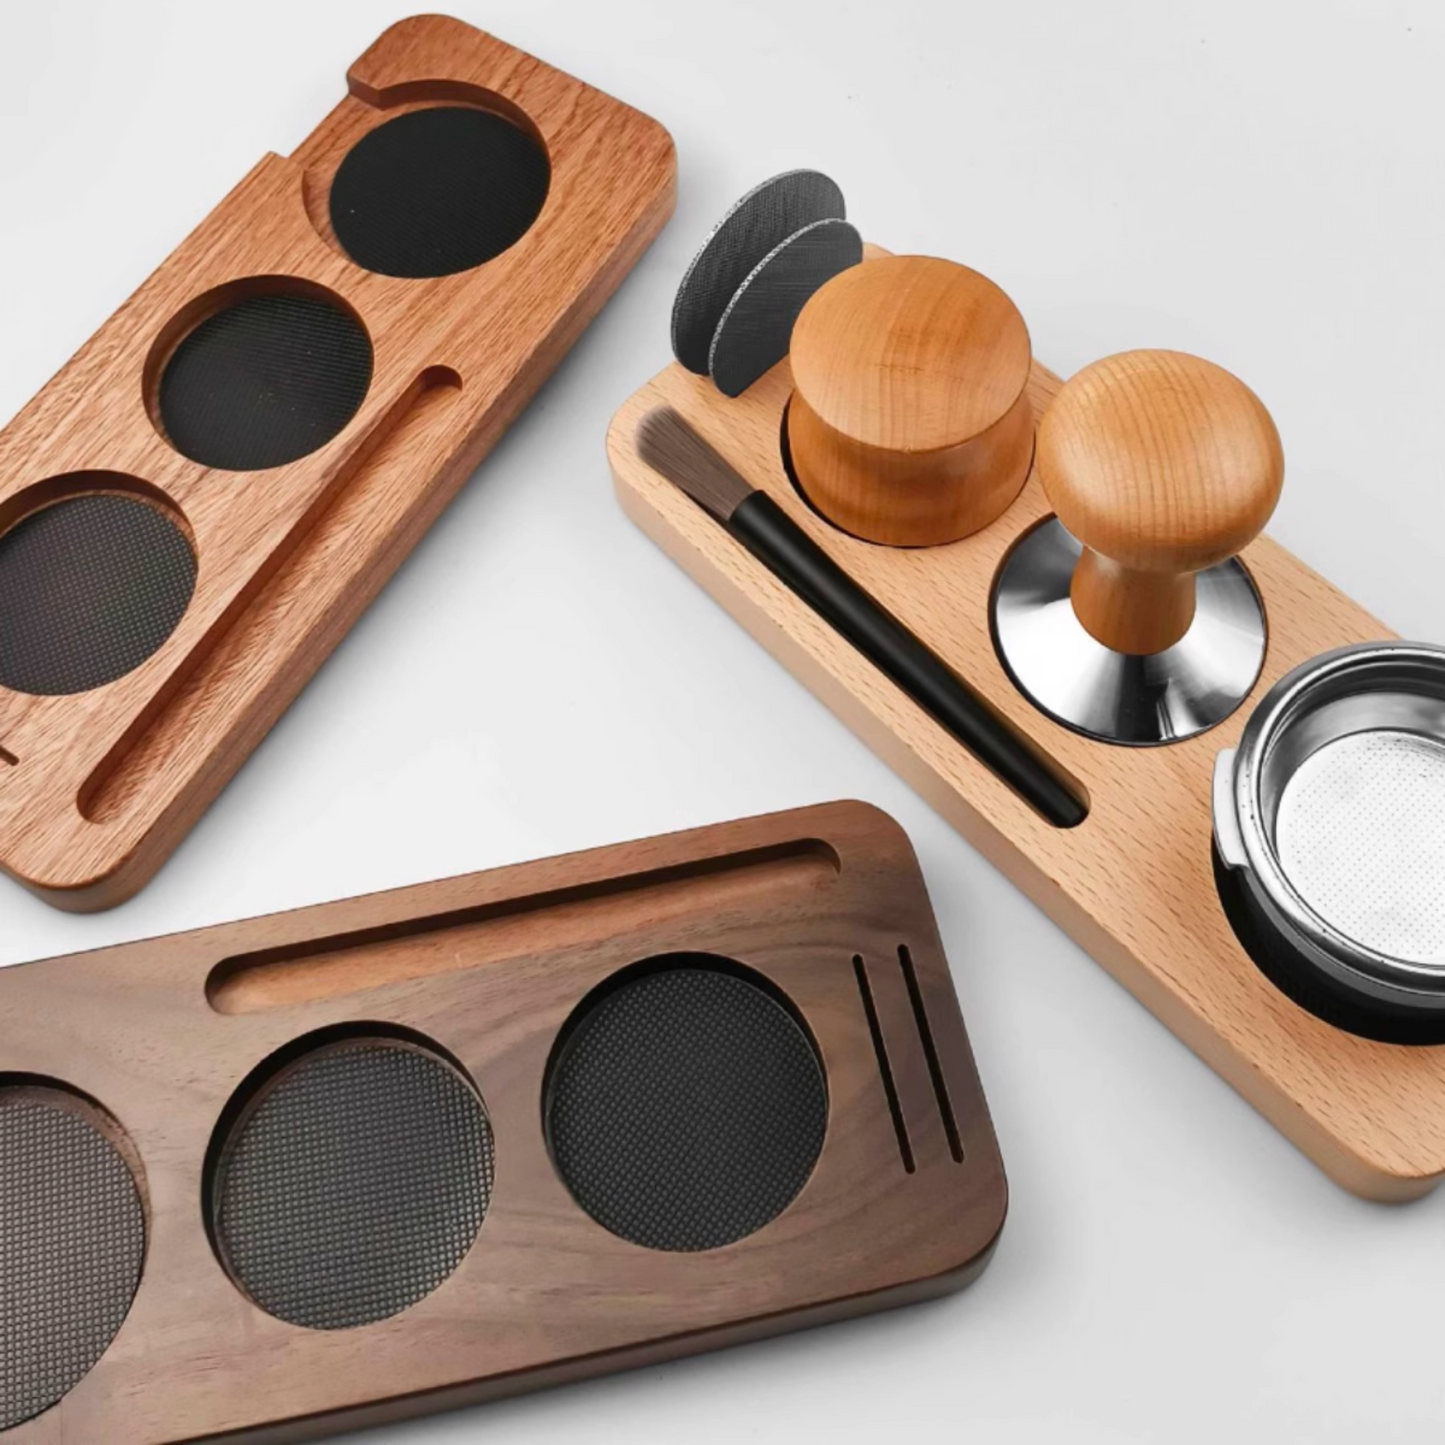 Wooden Coffee Tamper Holder with Puck Screen Slot